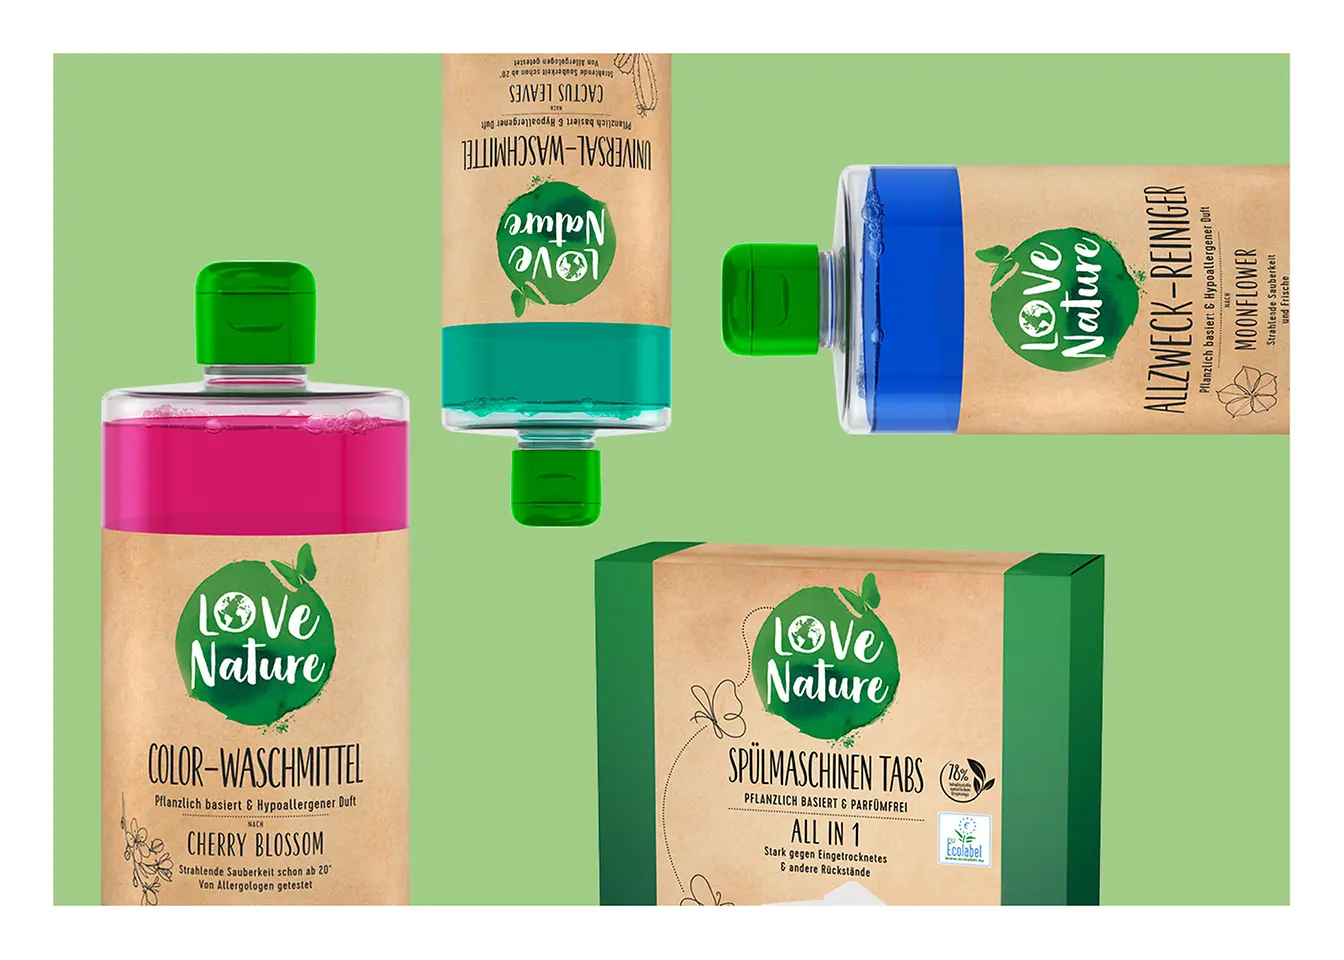 Love Nature products on a green background